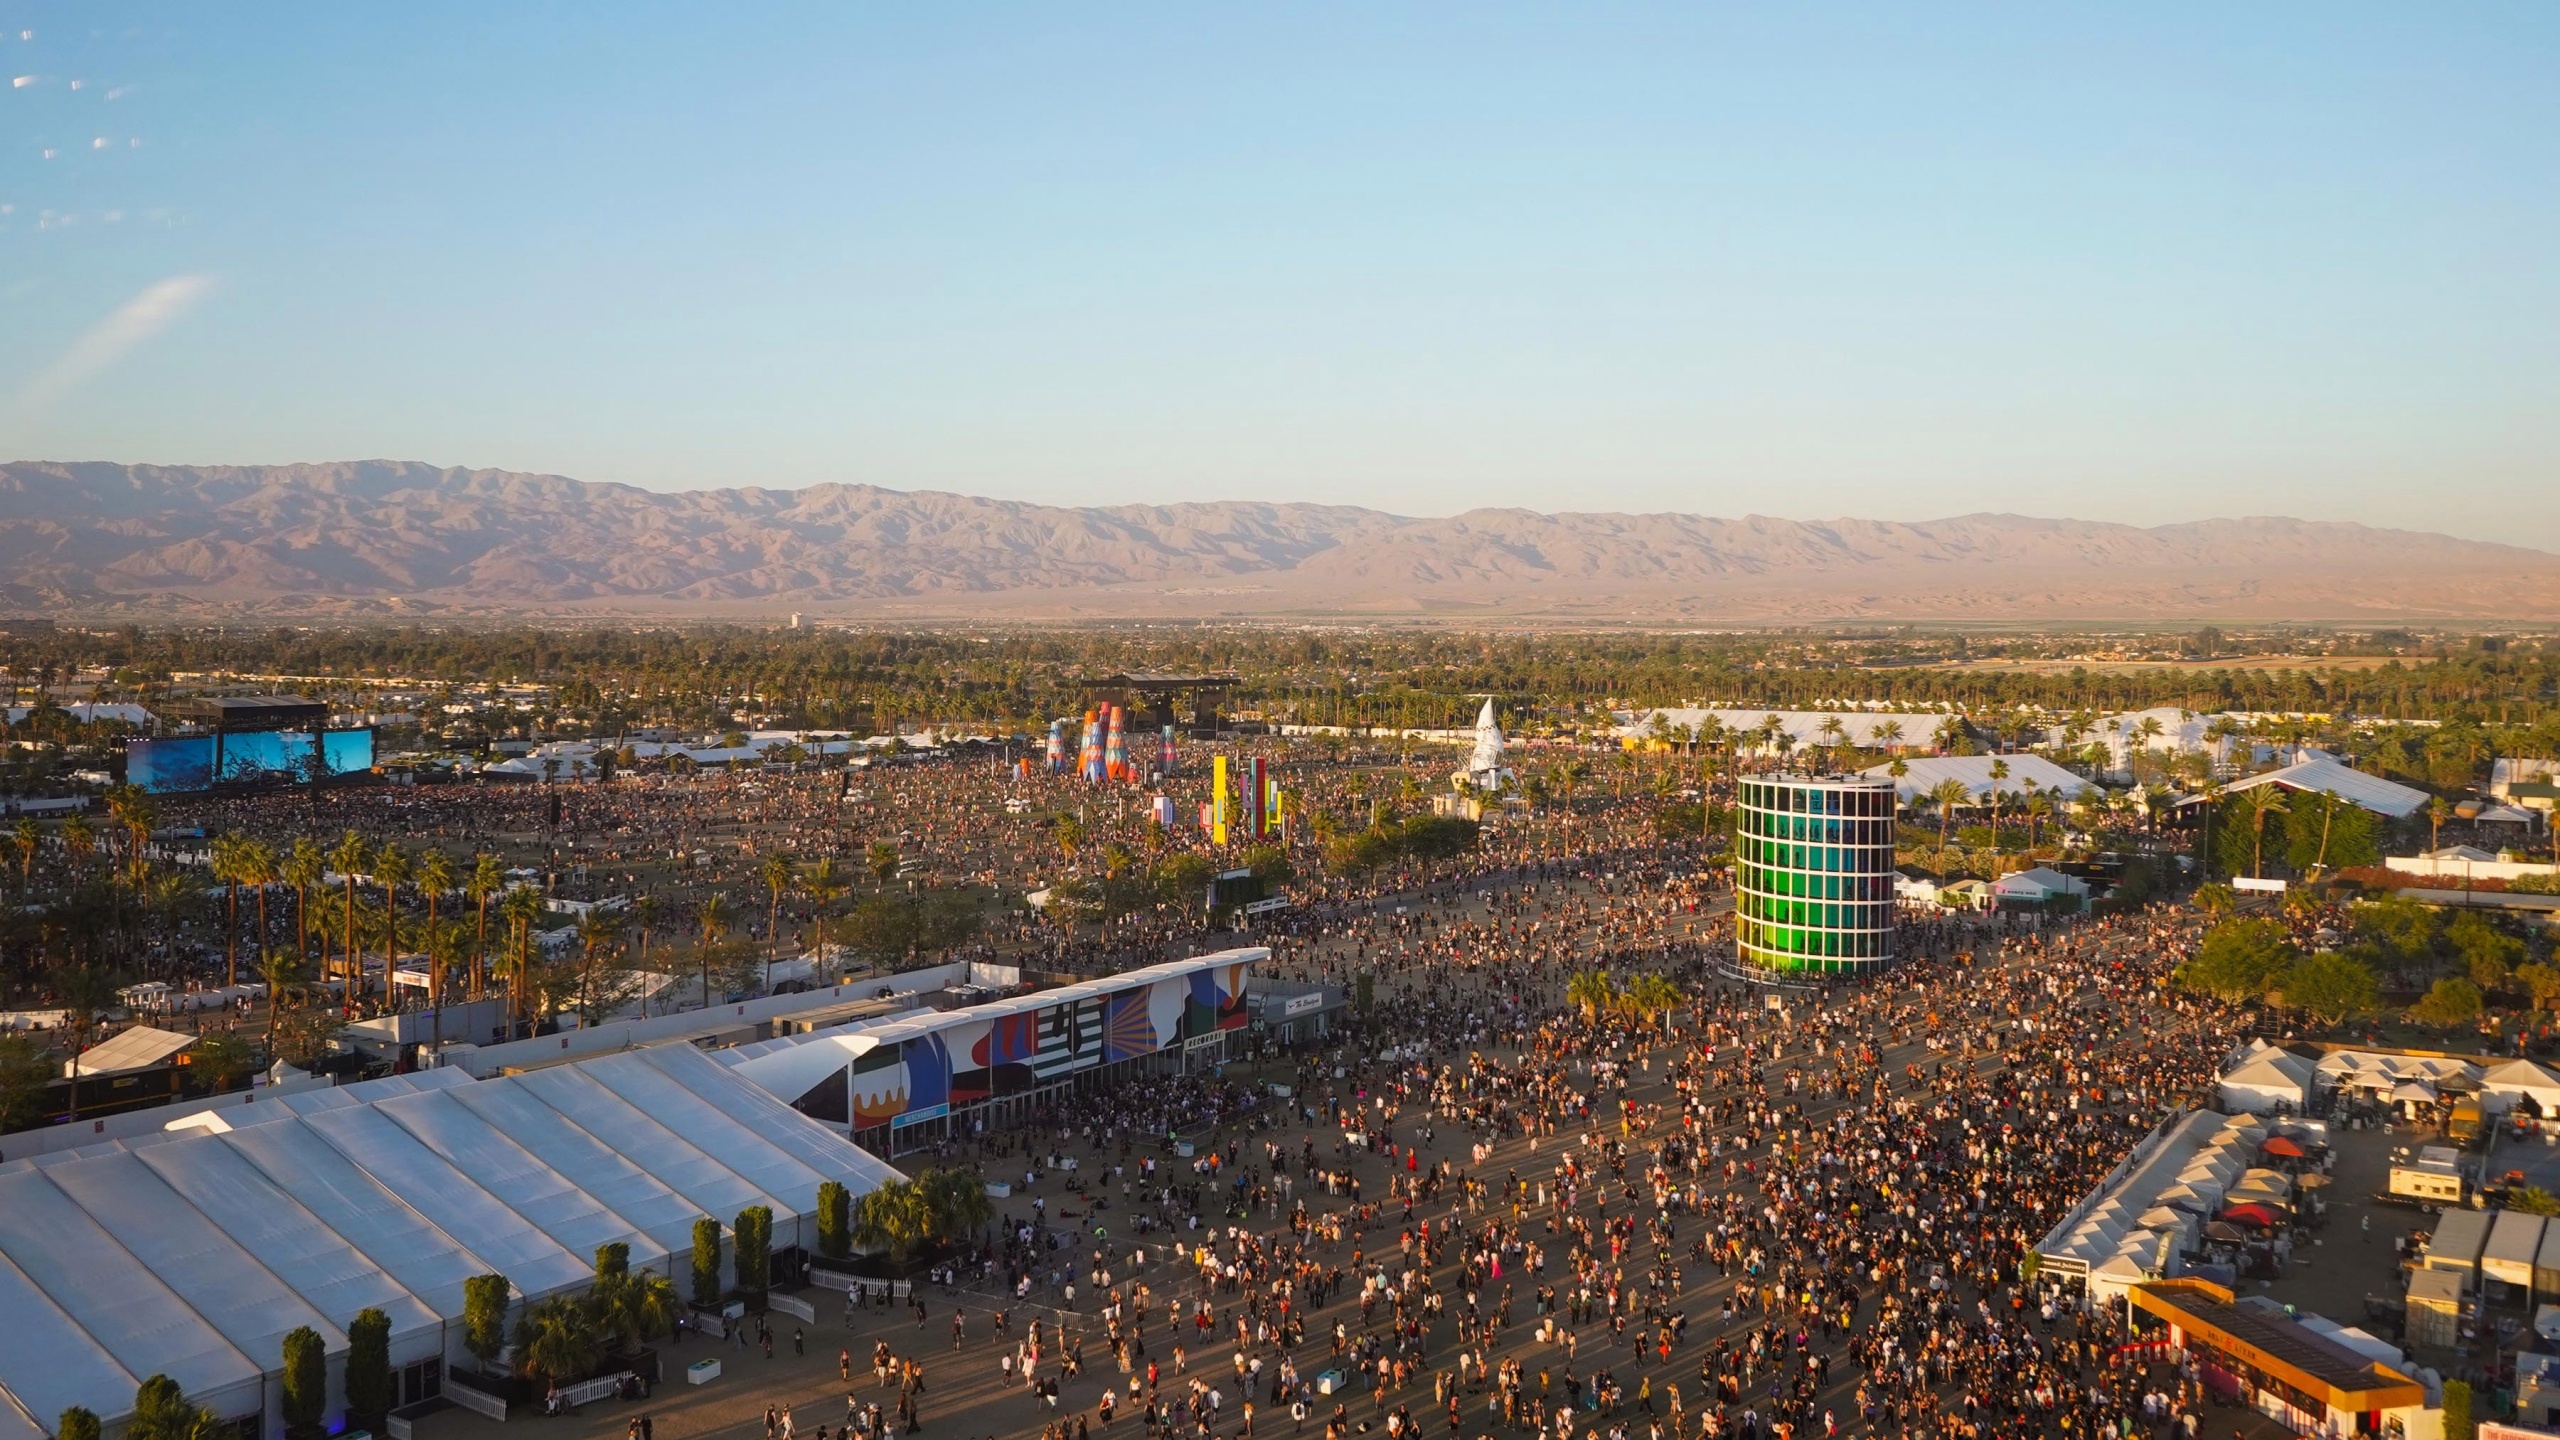 Coachella: It was co-founded by Paul Tollett and Rick Van Santen in 1999, Festival. 2560x1440 HD Background.